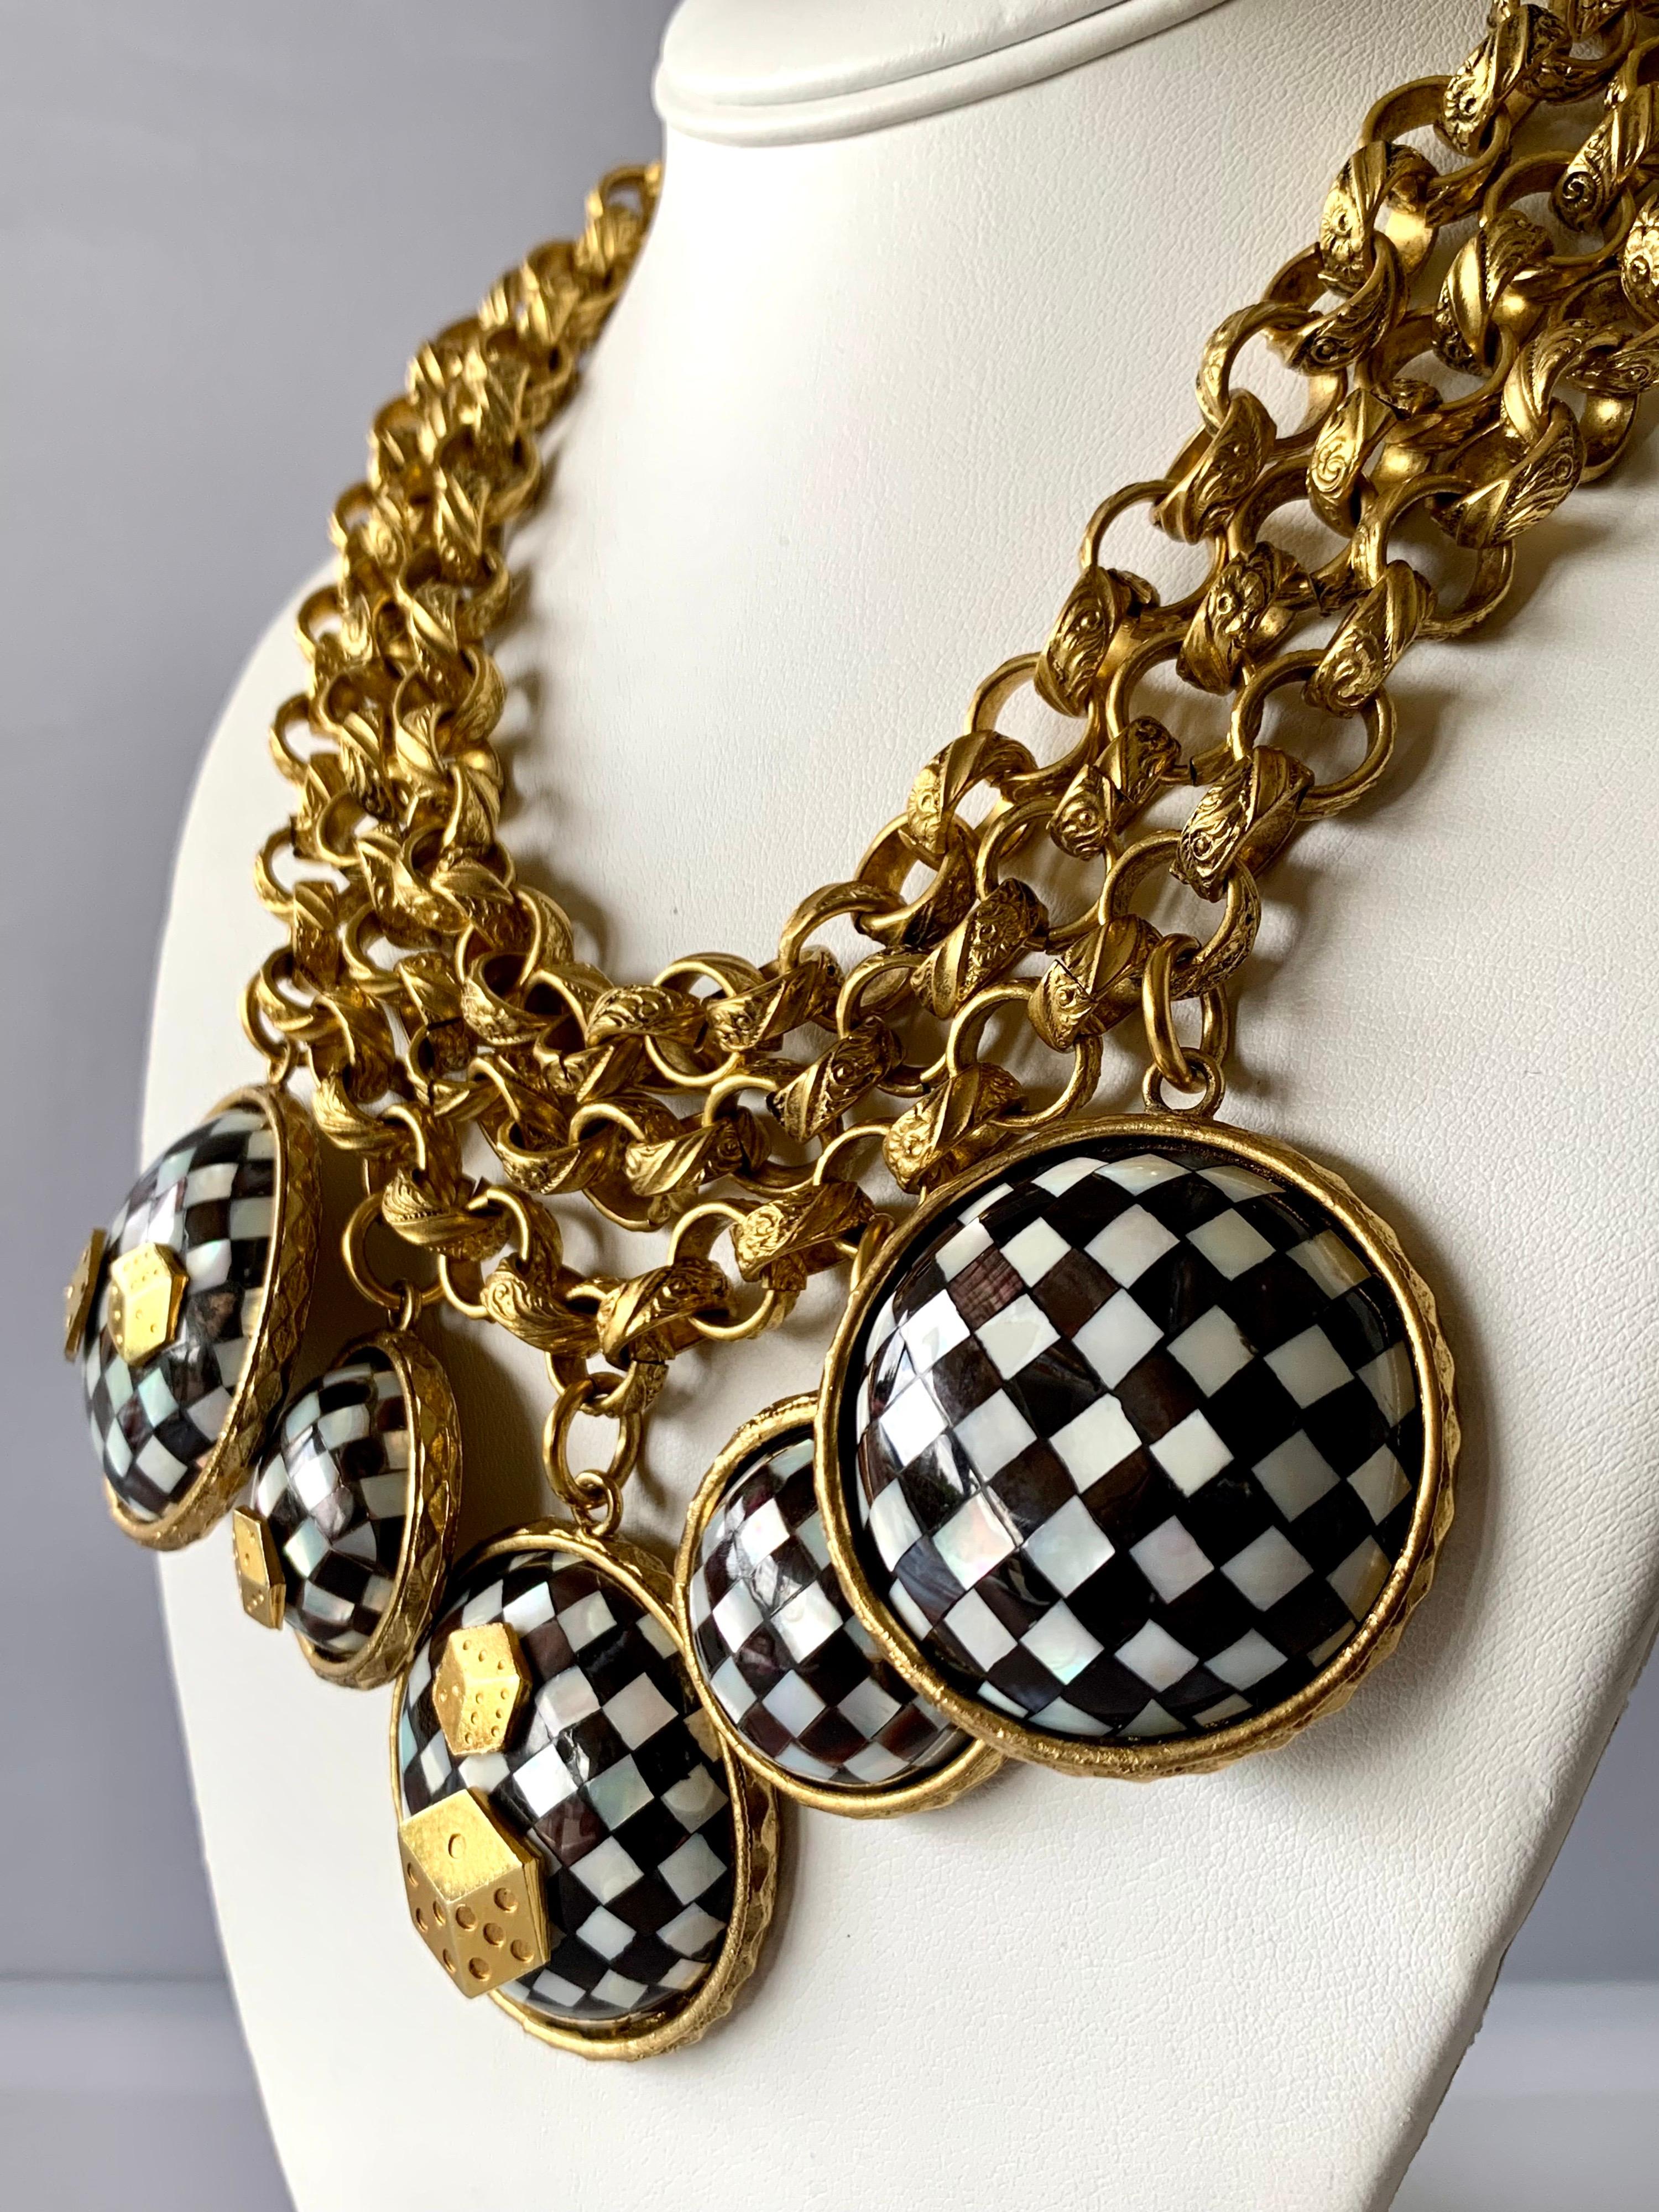 Vintage Mercedes Robirosa chunky three-dimensional gold-tone statement necklace featuring large round checkered mother of pearl charms embellished by gold dice - made in France. 

Note: The necklace has a wearable length of up to 18 inches.